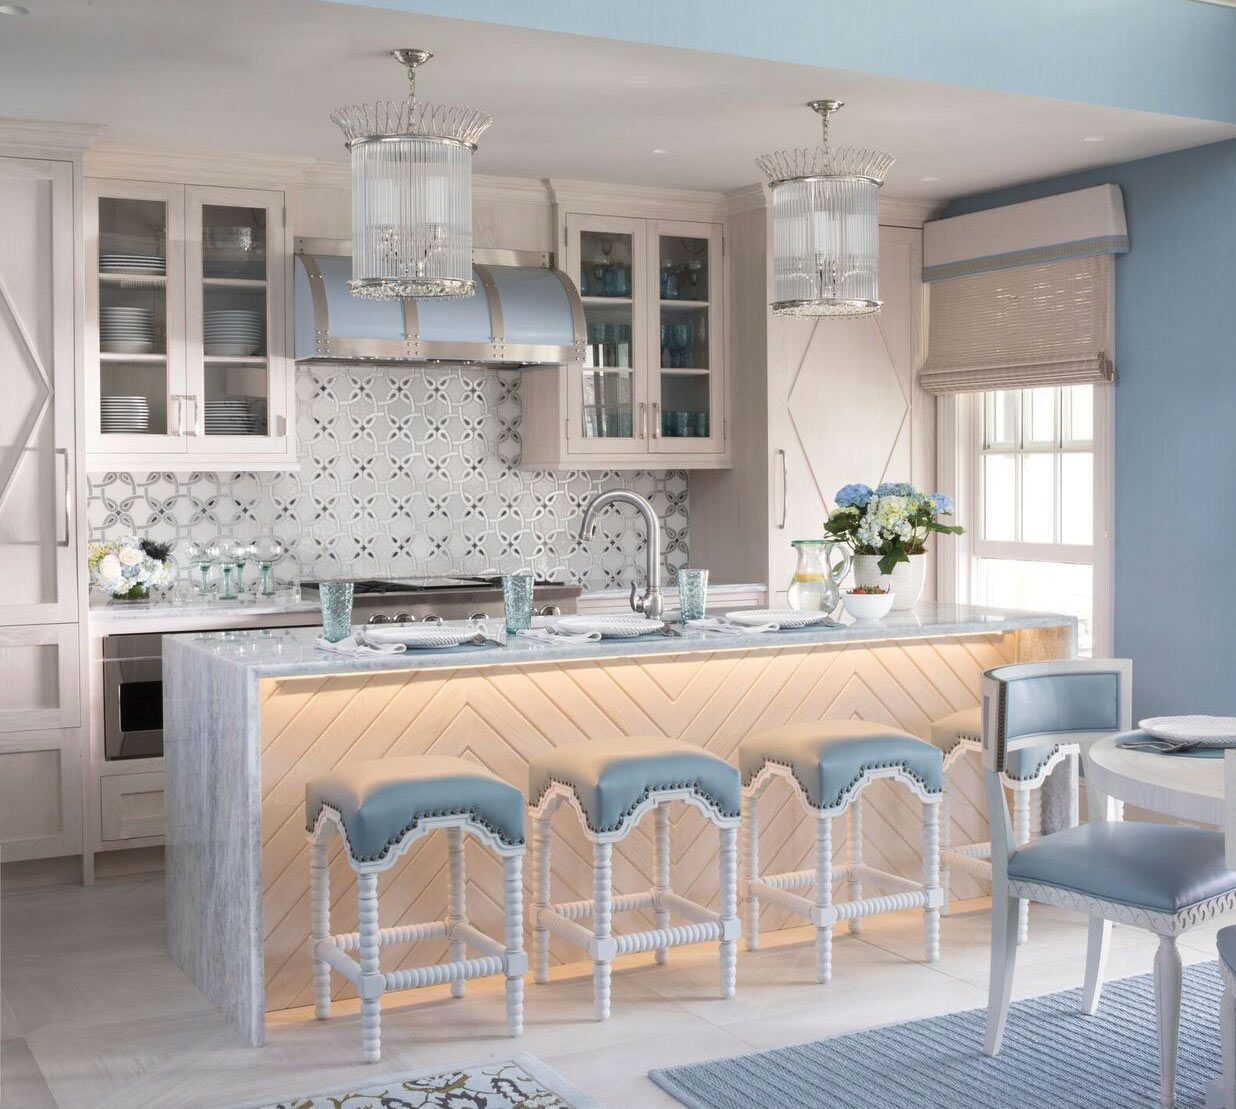 A luxurious light blue kitchen island with cloud blue seats, blue stove hood and other accents